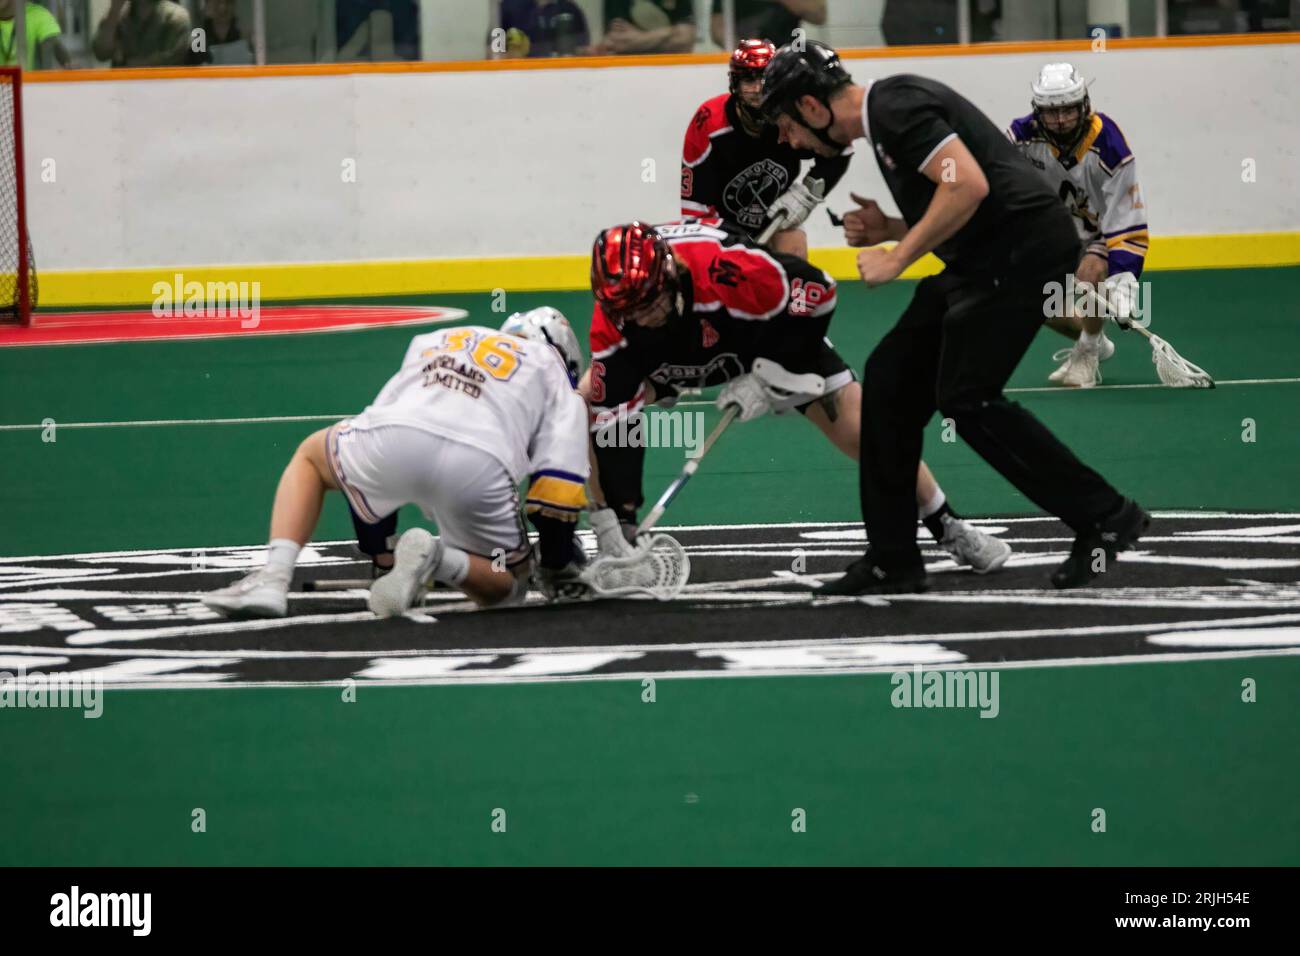 Edmonton Miners (black/orange) Ronin Pusch (16) works the ball in the faceoff circle against Coquitlam Adanacs (White Yellow) Ben Coghill (36) in Minto Cup Day 2 action between Edmonton Miners and Coquitlam Adanacs at Bill Hinter Arena. Final Score: Edmonton Miners vs Coquitlam Adanacs, 11:15 The Minto Cup is the National Junior A Box Lacrosse championship. The Minto Cup was donated in 1901 by Sir Gilbert John Murray Kynmond Elliot, and was formally made the trophy for the Junior A National box lacrosse championship in 1937. (Photo by Ron Palmer/SOPA Images/Sipa USA) Stock Photo